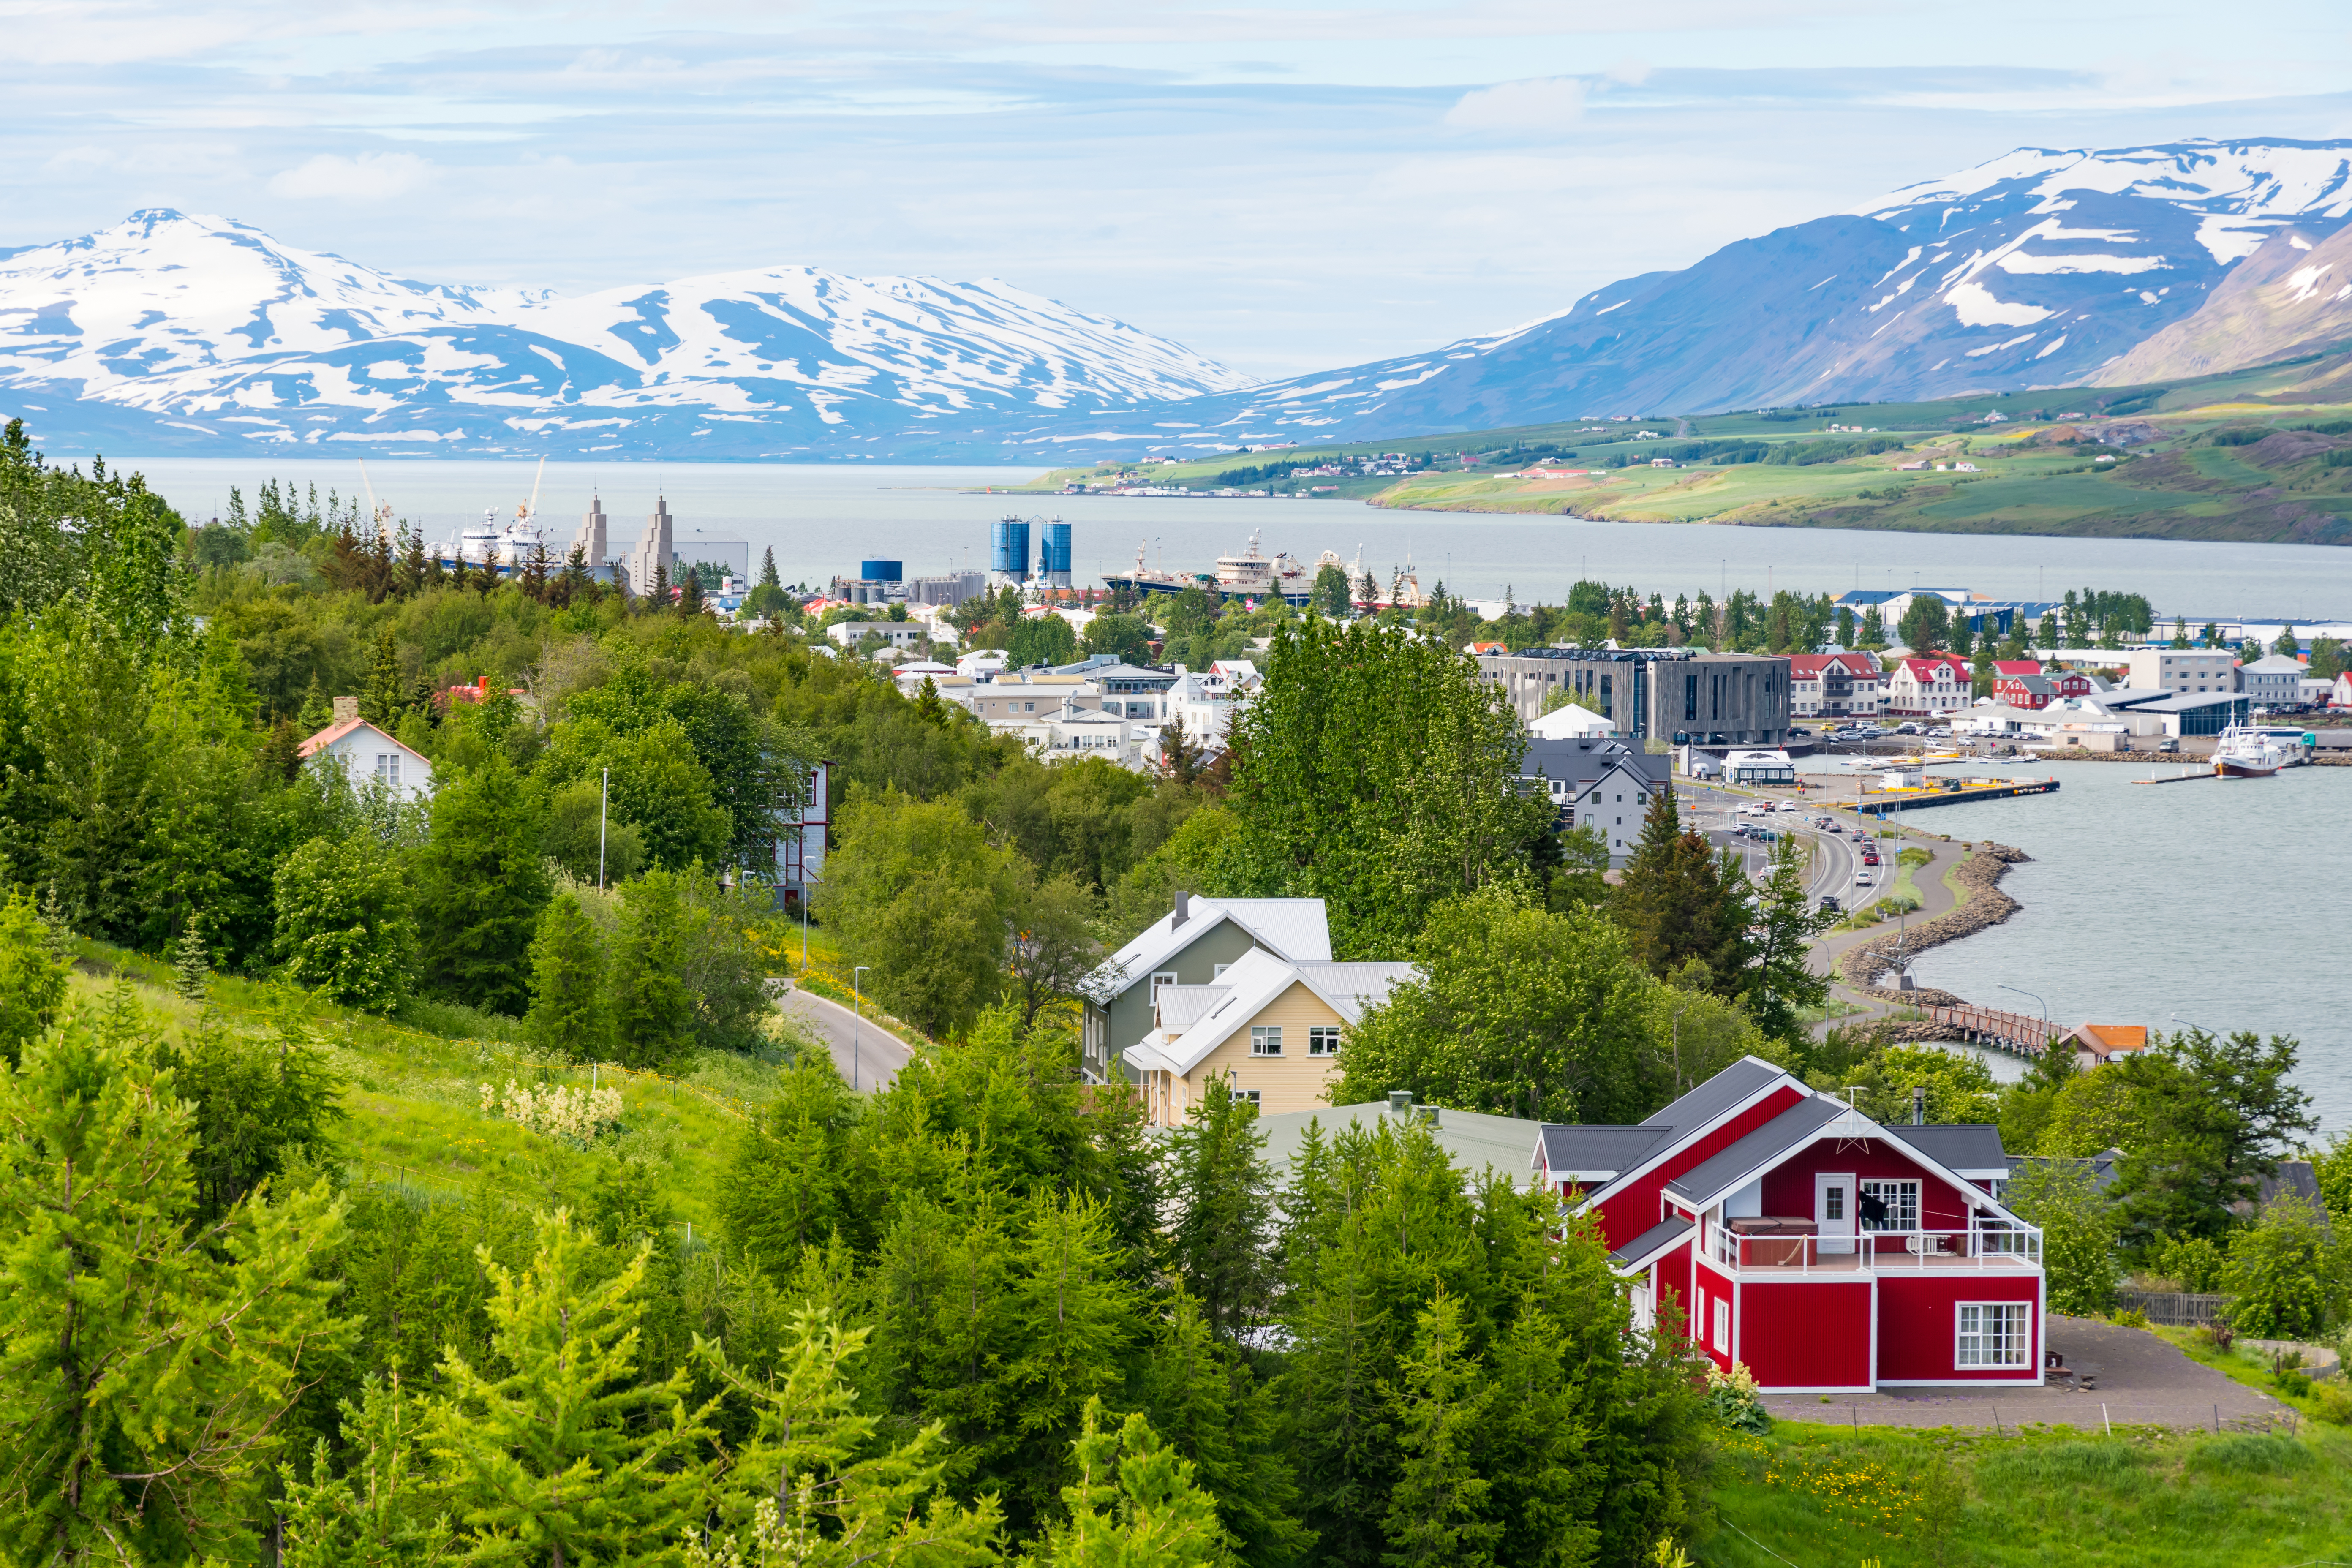 Akureyri, a nice city to move to Iceland permanently